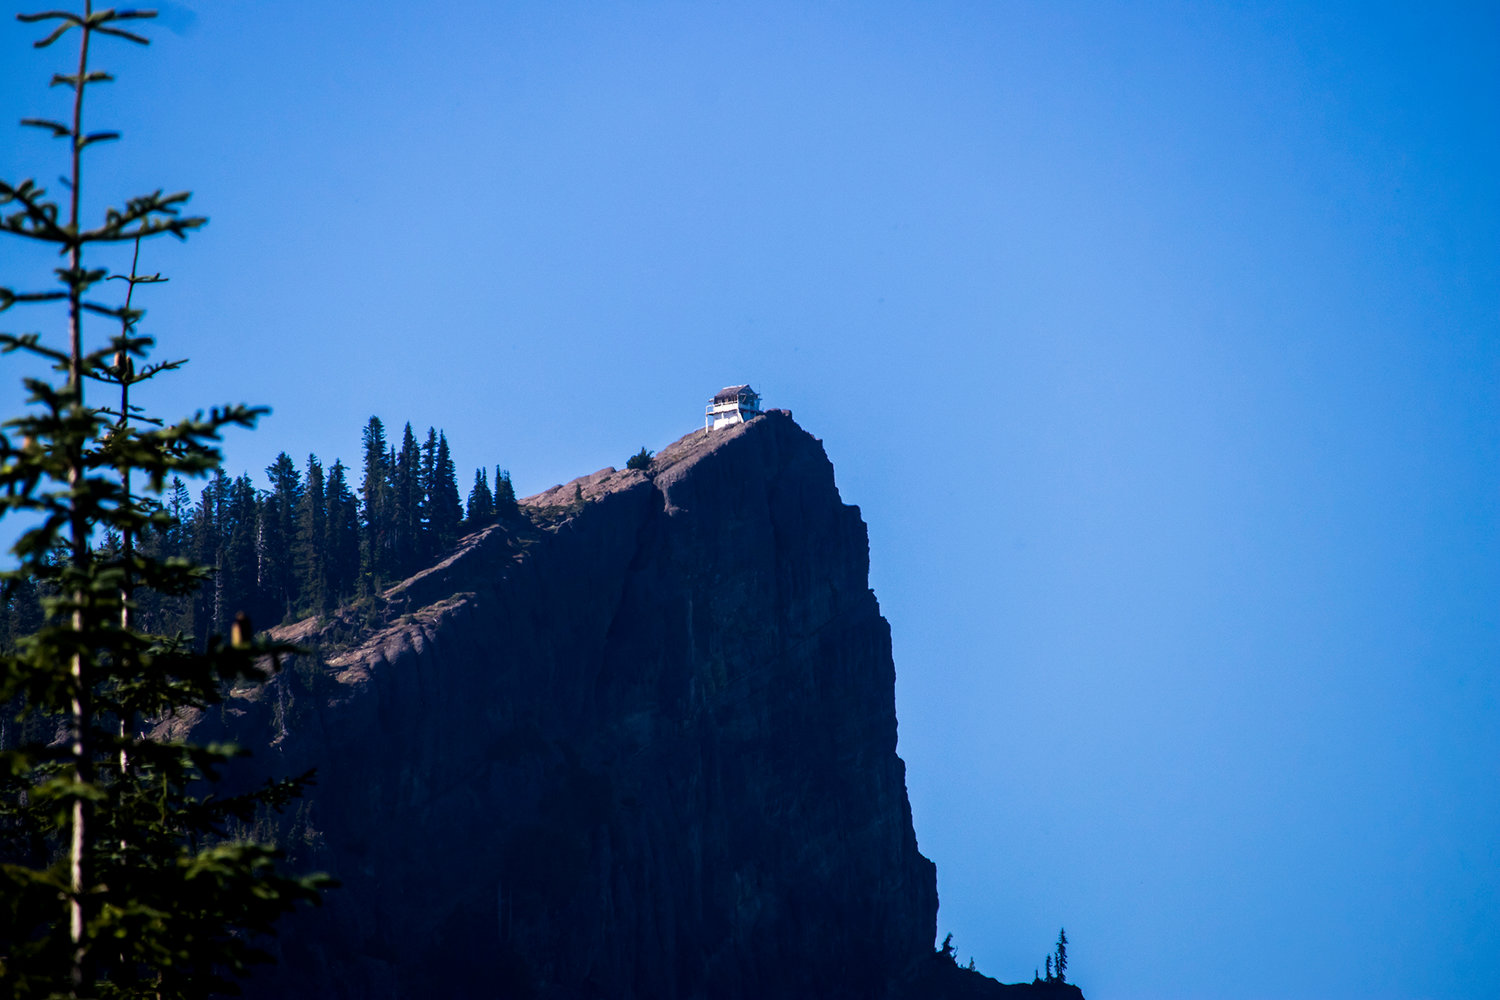 The High Rock Lookout is seen from the trailhead Tuesday afternoon in the Gifford Pinchot National Forest.